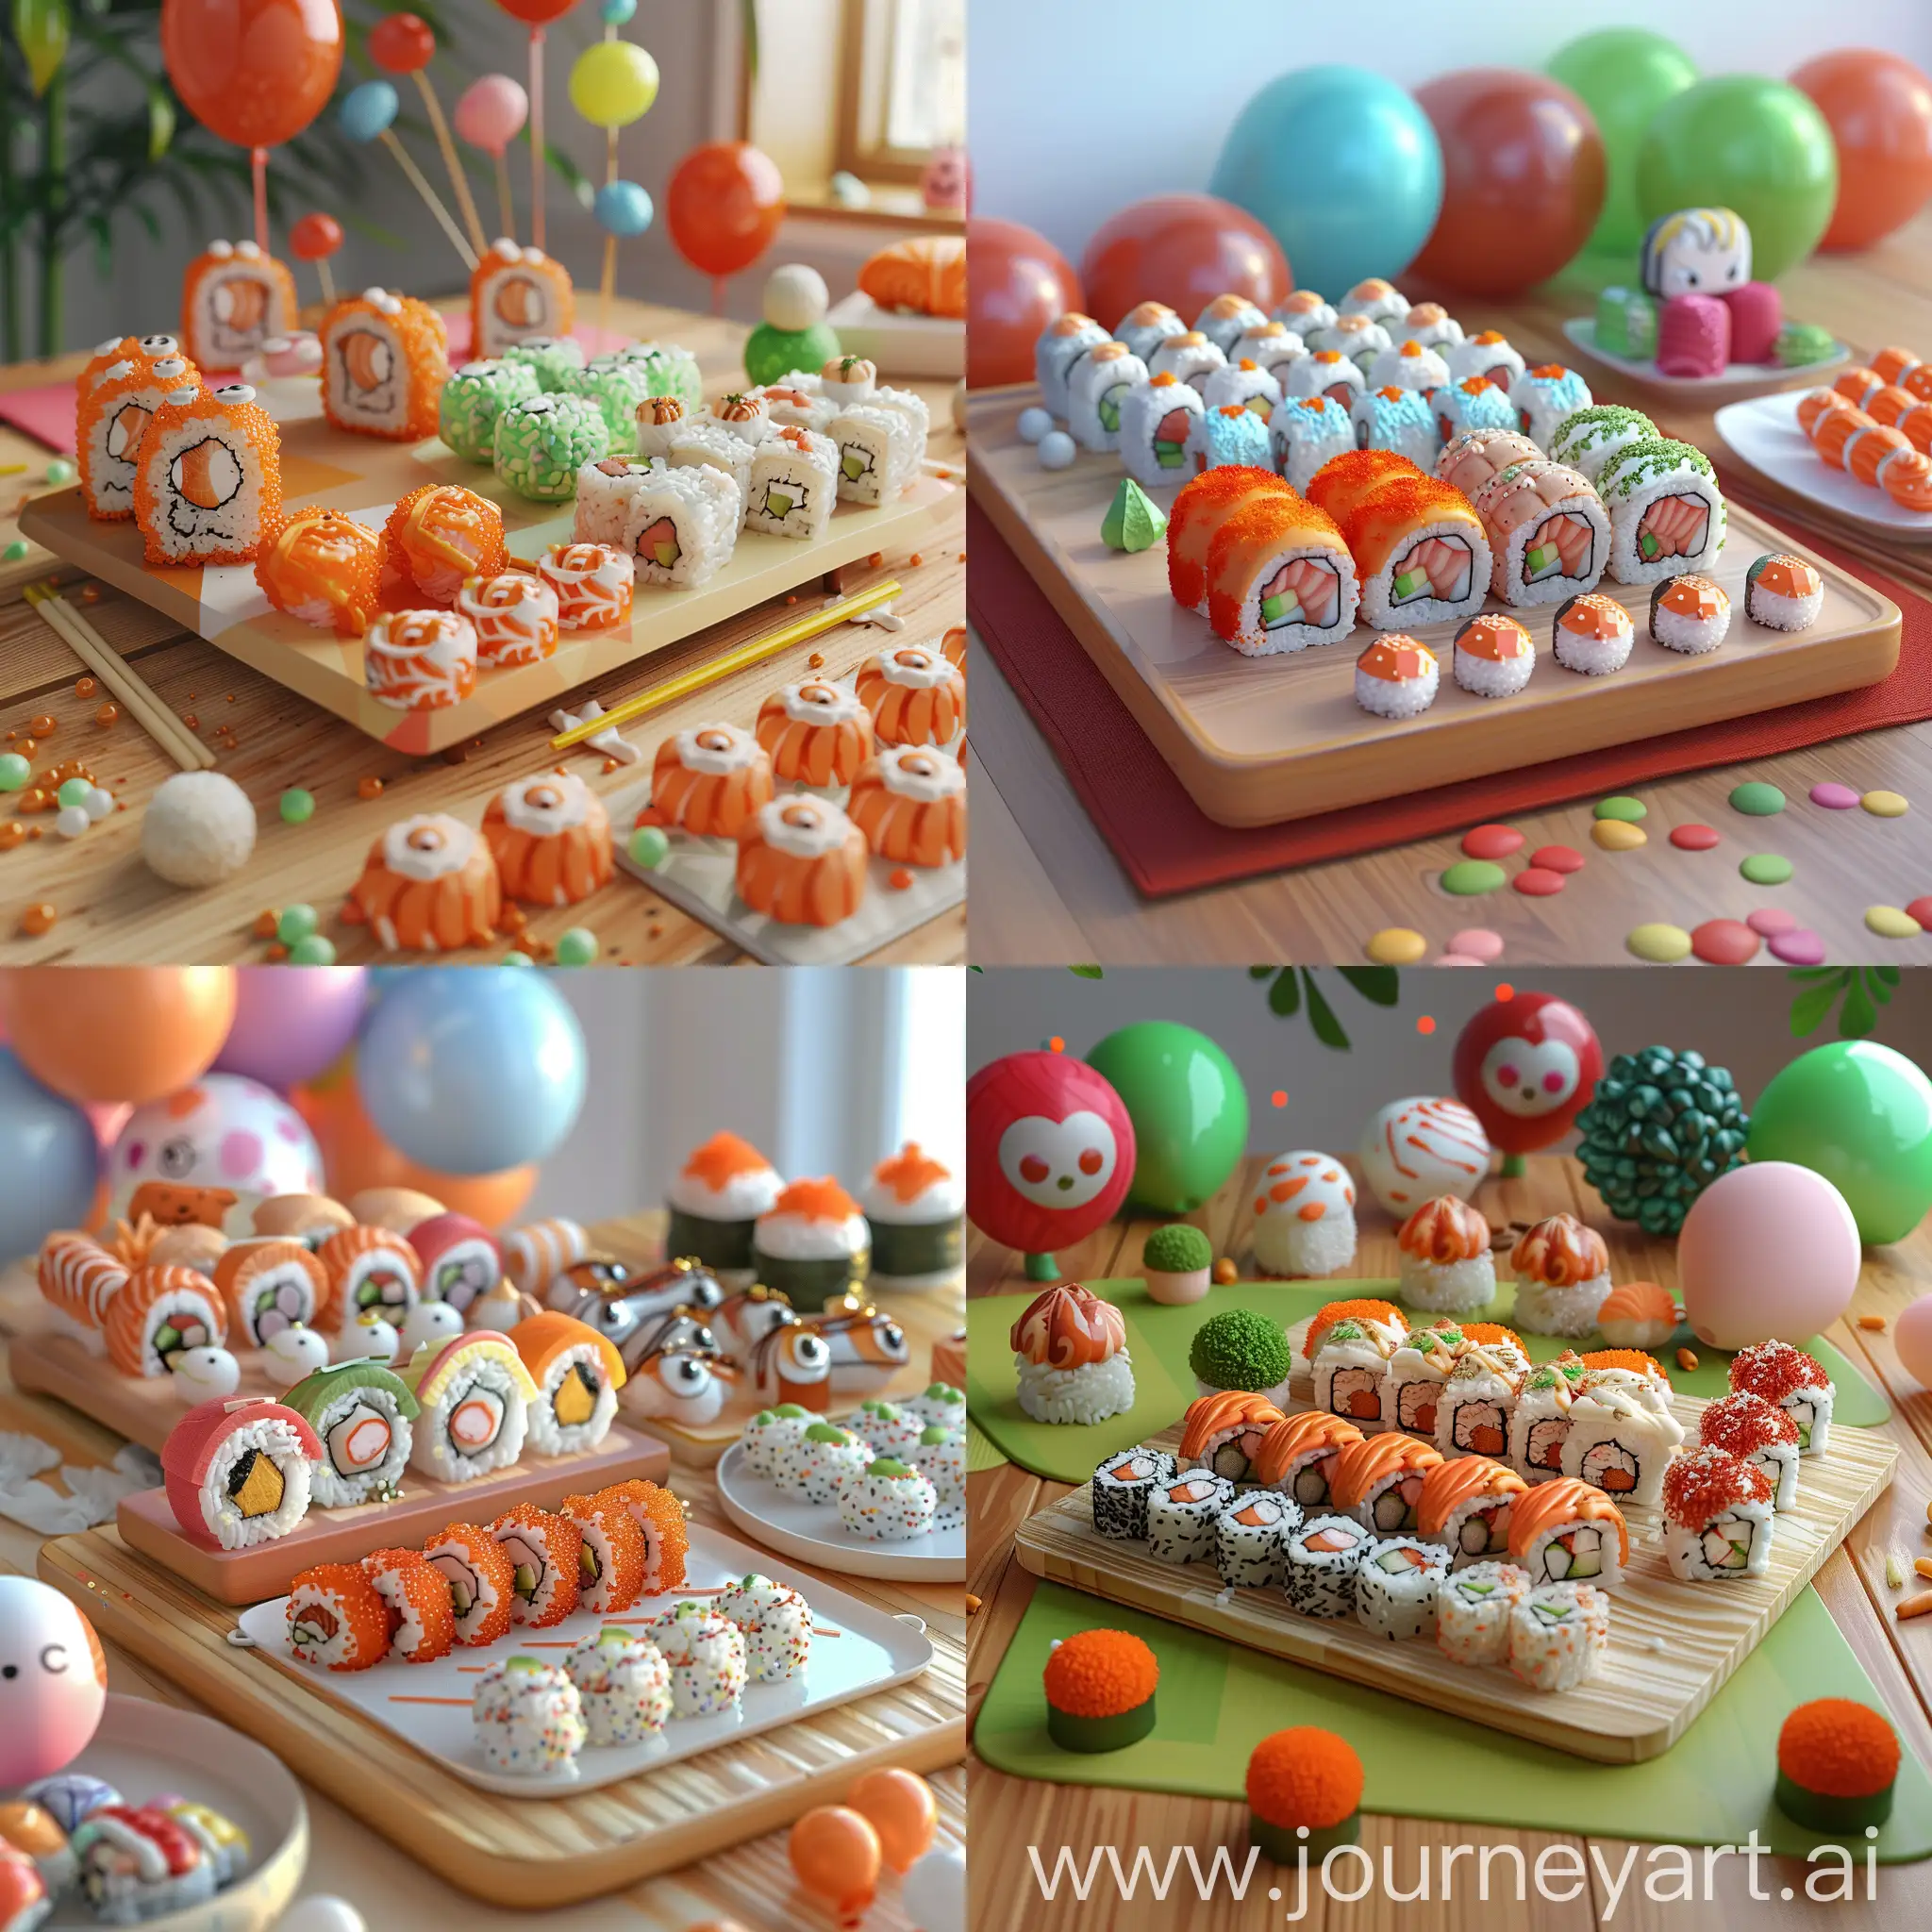 sets of different rolls on a sushi board, there are sushi and rice balls on a plate with a sushi, cute 3 d render, cute, hyperrealistic, lush, cinematic, c4d, 4k polymer clay food photography, sushi, anime food, kawaii hq render, pop japonisme 3 d ultra detailed, kenny wong x pop mart, kawaai, kawaii japanese style, kawaii, japanese kawaii style, super realistic food picture, birthday, balloons, holiday, hyper realism , realistic